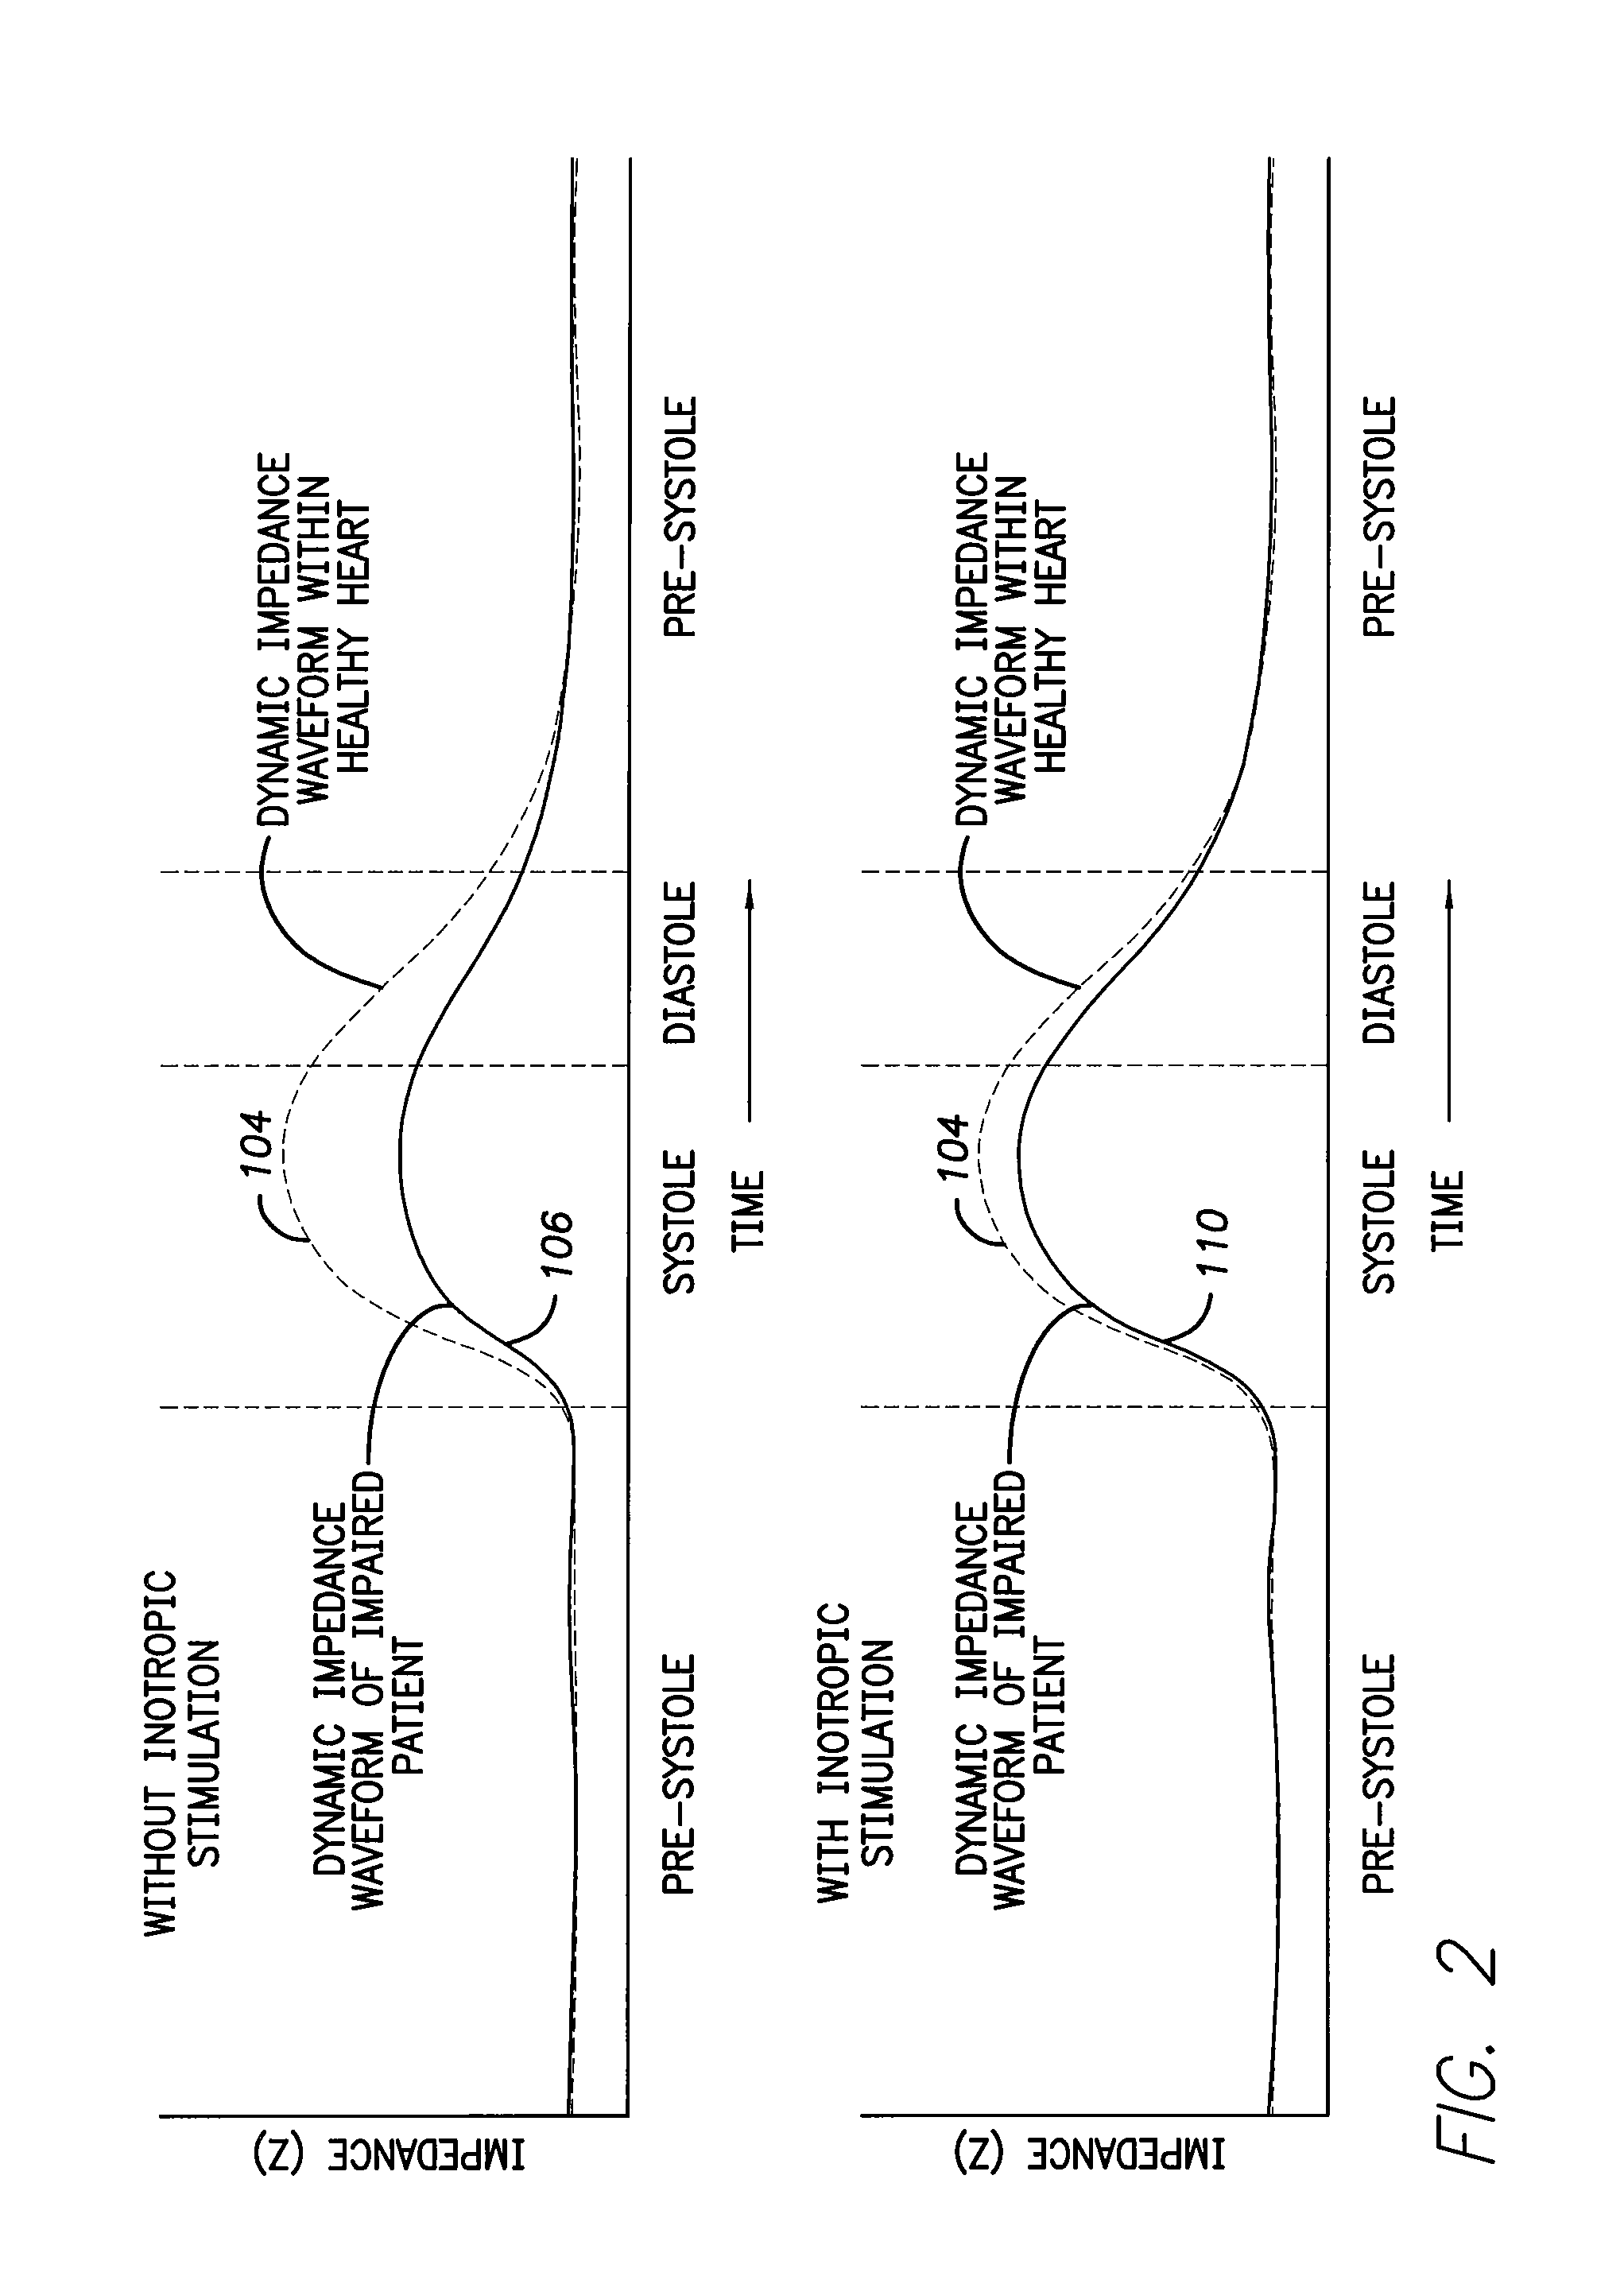 Systems and methods for delivering stimulation pulses using an implantable cardiac stimulation device